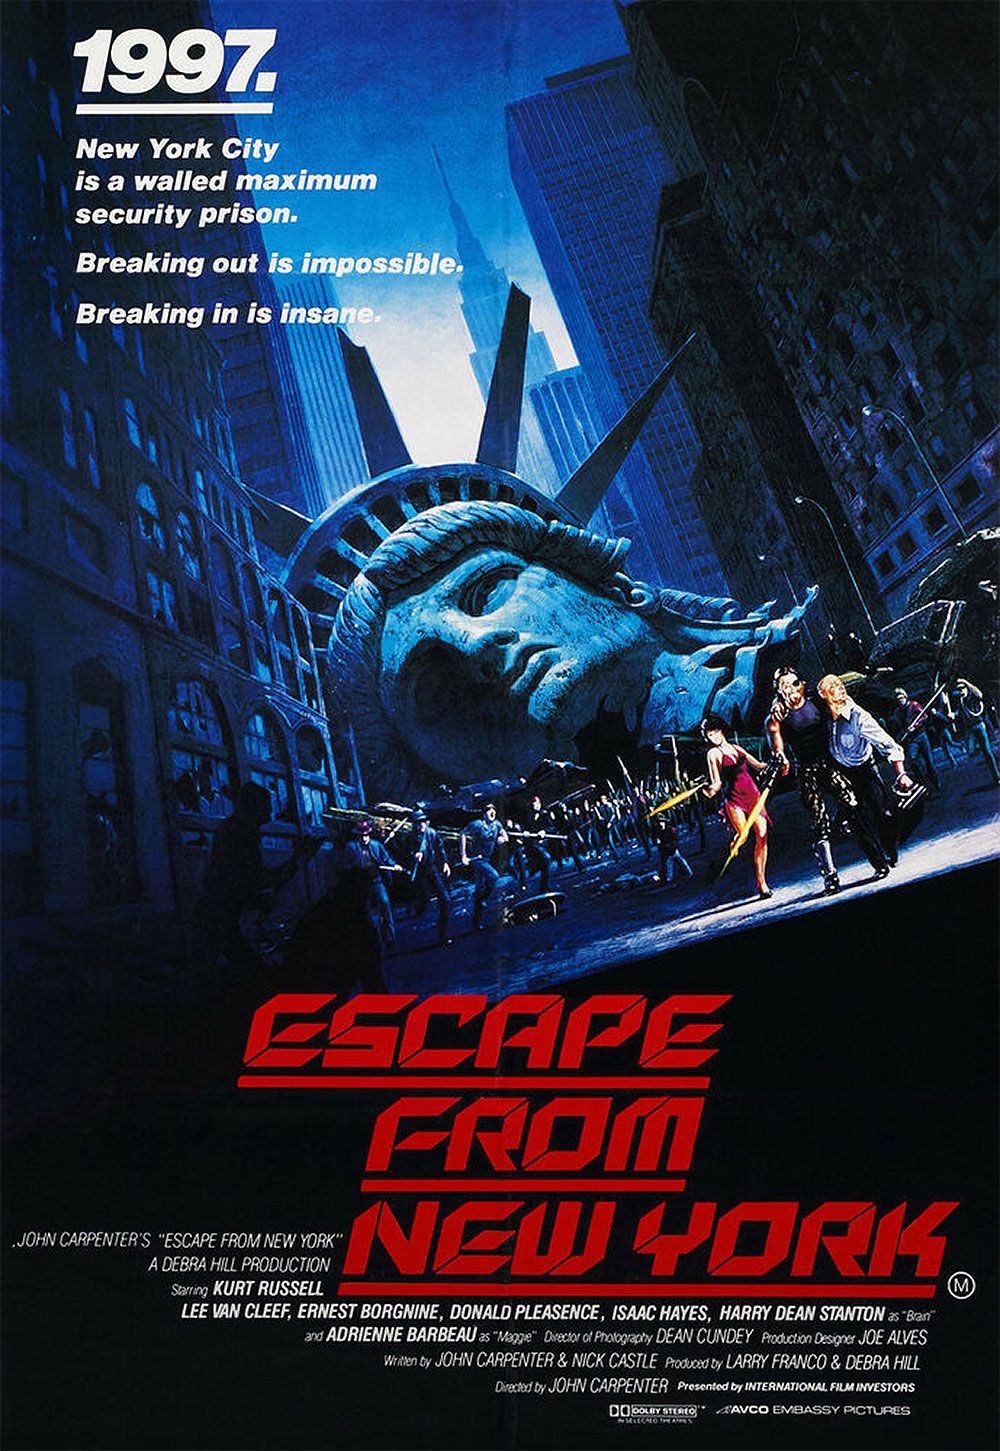 The original 1980s poster for Escape From New York